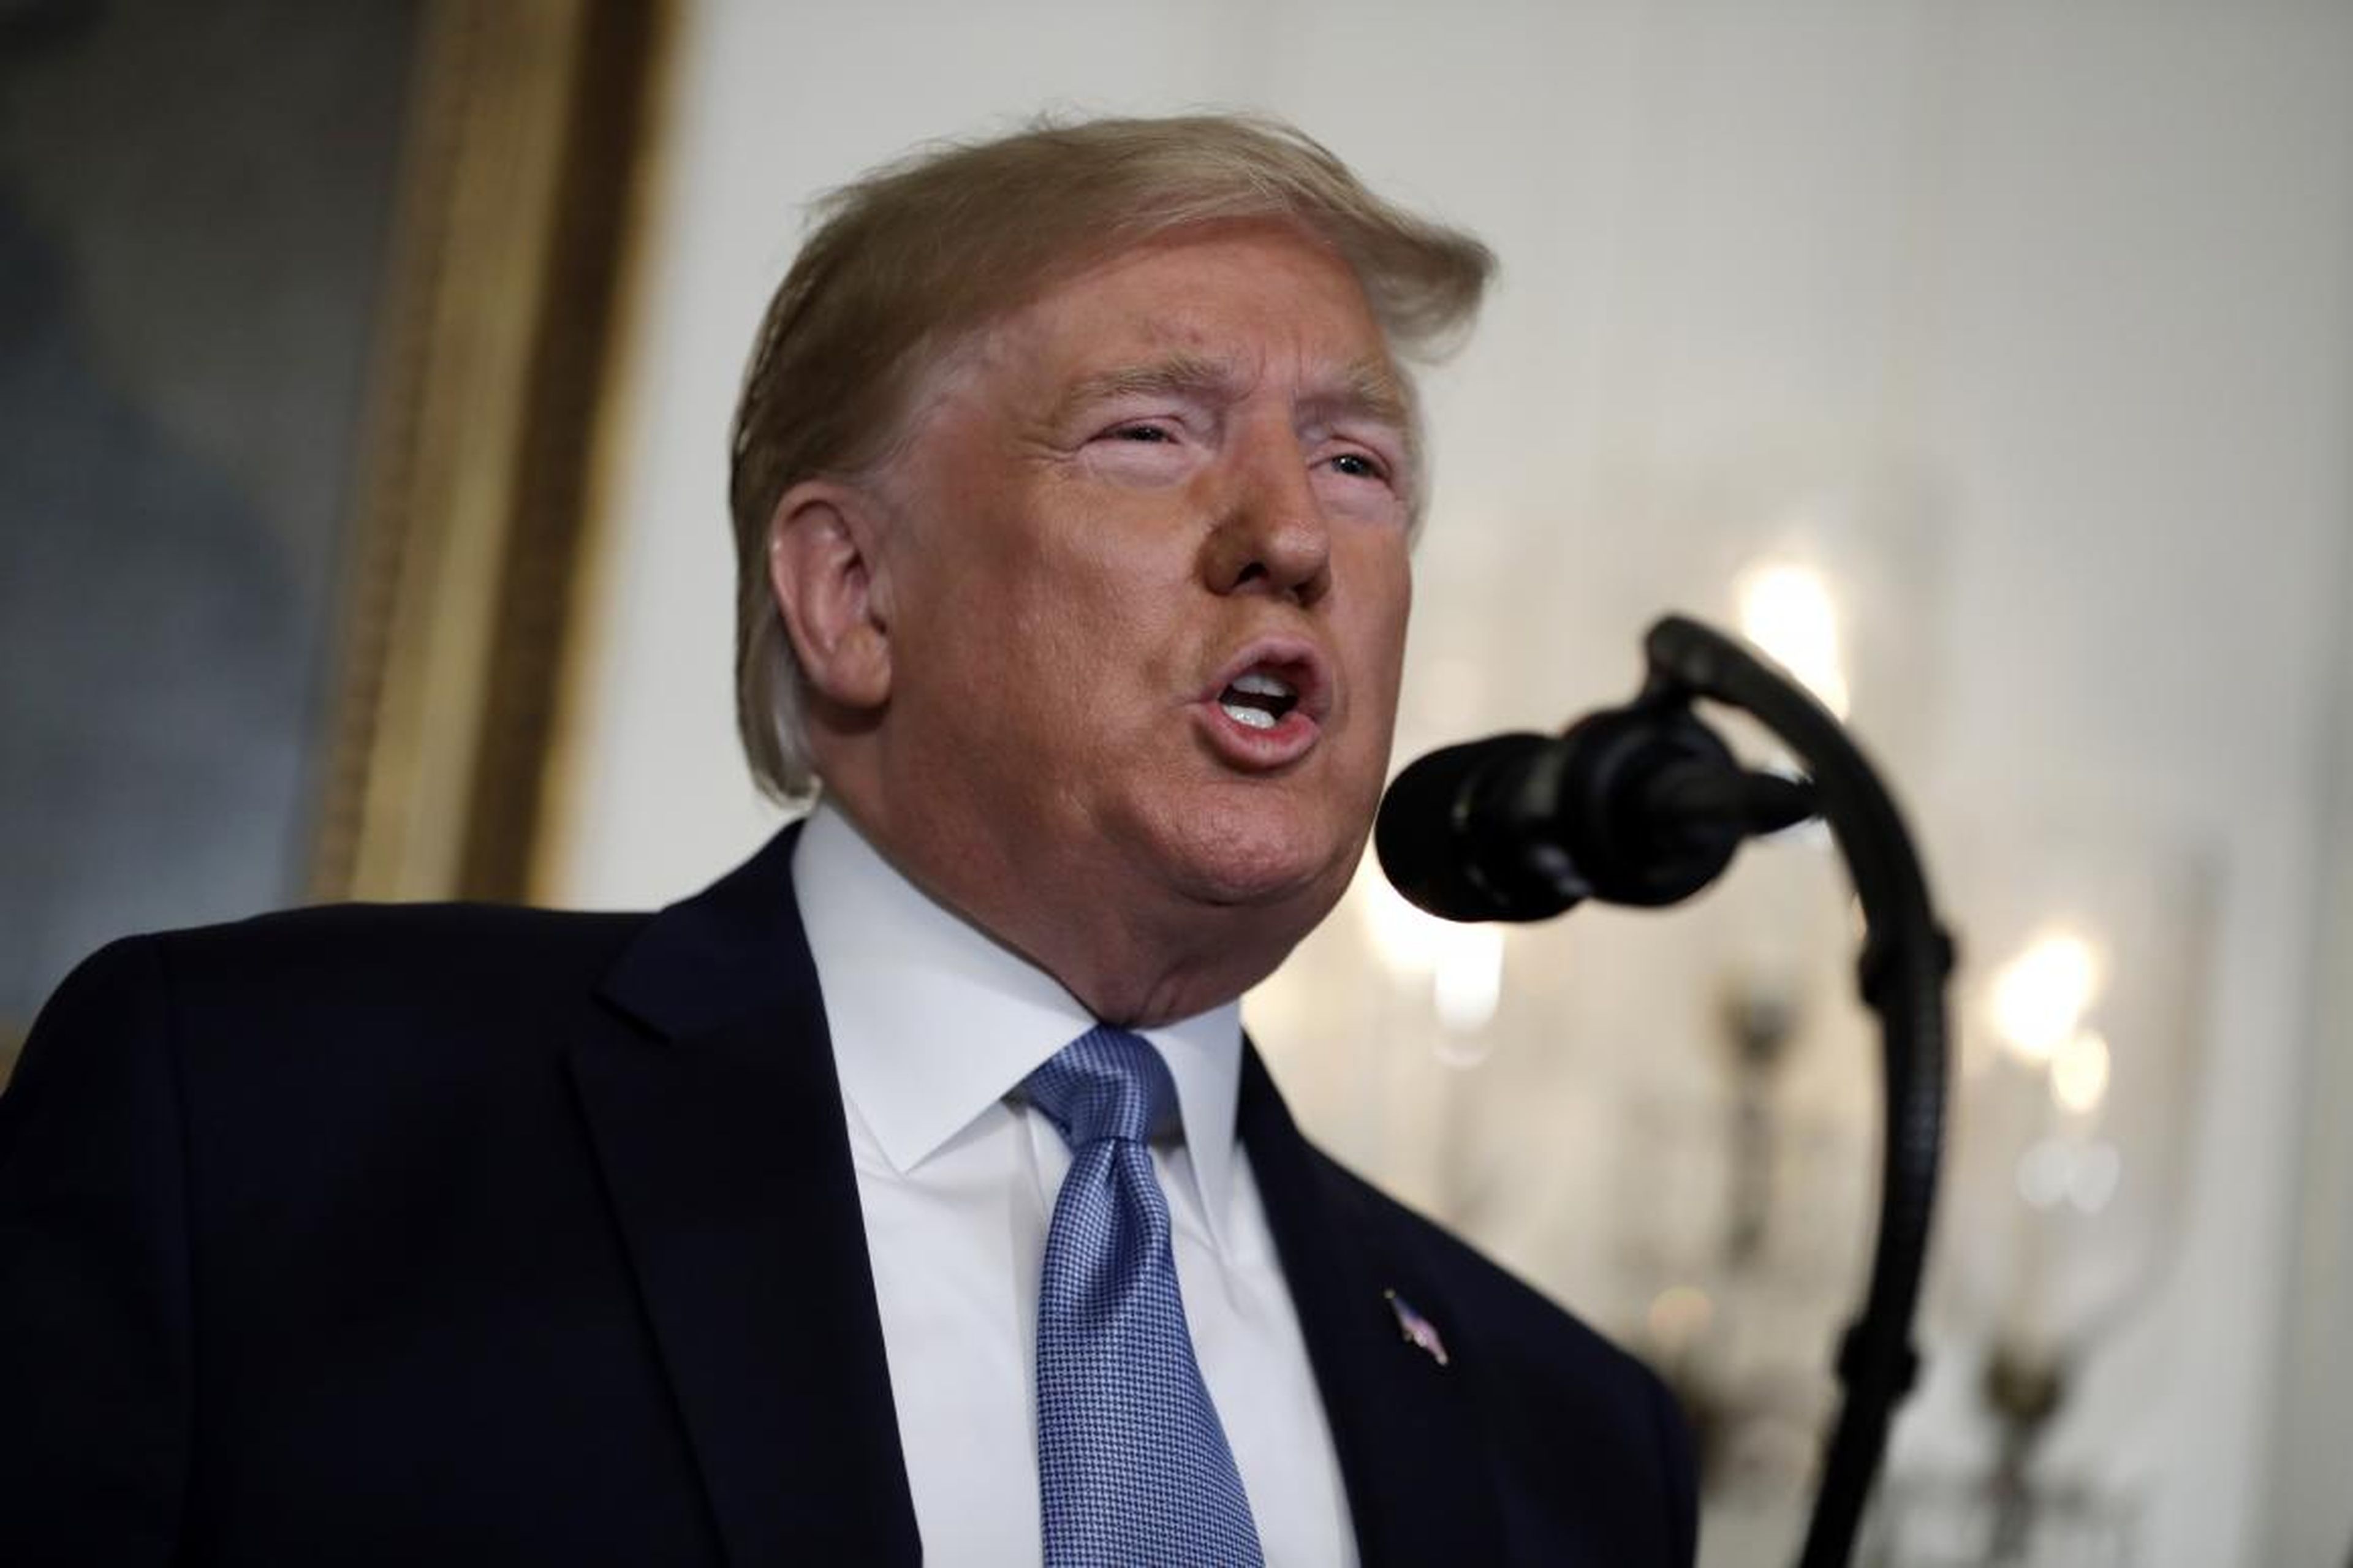 Trump at the White House on Monday talked about the mass shootings in El Paso and Dayton.